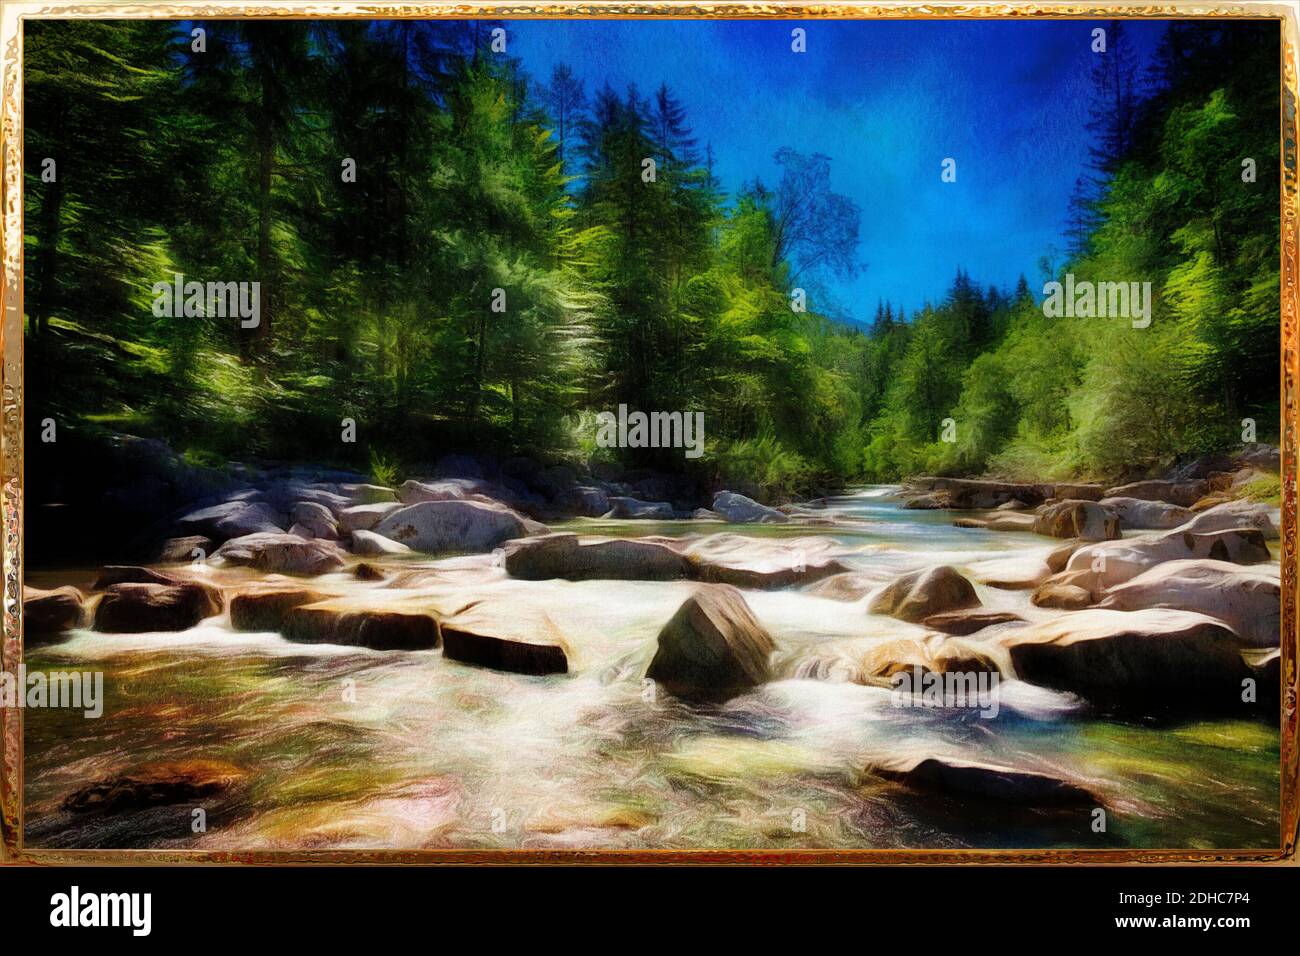 CONTEMPORARY ART: River Weissach at Wildbad Kreuth, Upper Bavaria, Germany Stock Photo